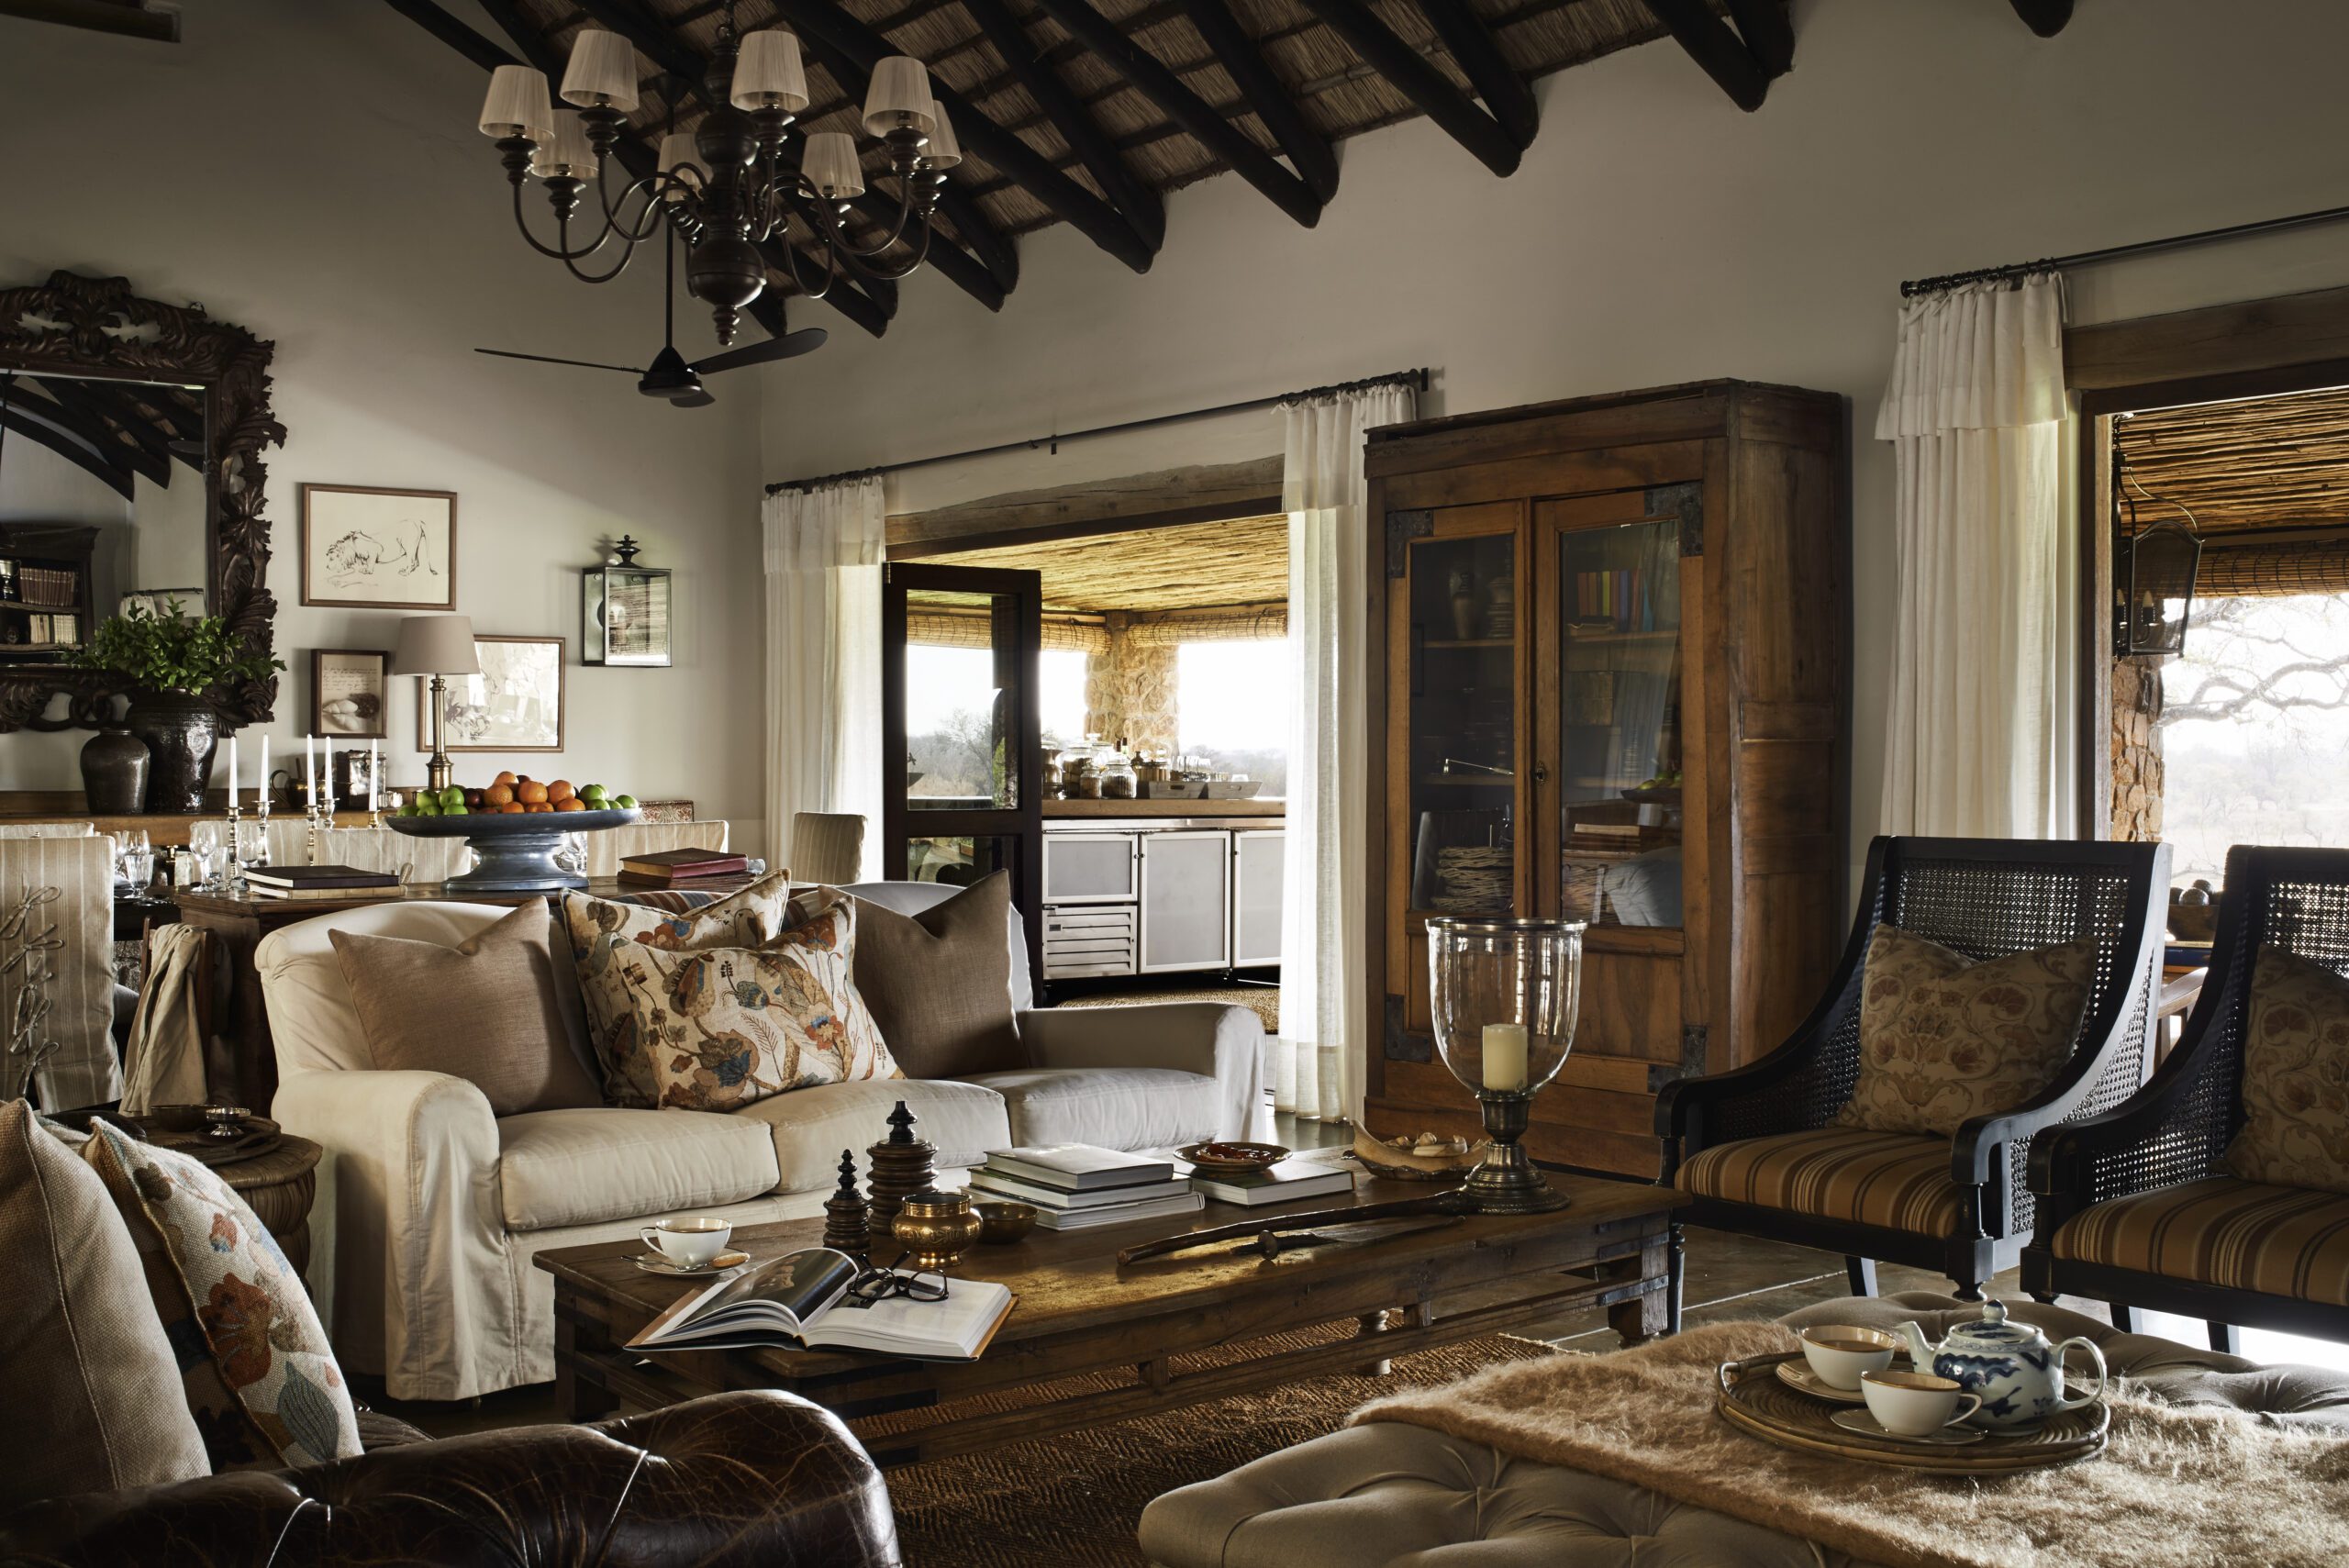 9 Perfect Properties for a Multigenerational Safari, Singita Castleton has as much charm and style as it does excitement and adventure waiting just outside its doors. ©Singita Castleton